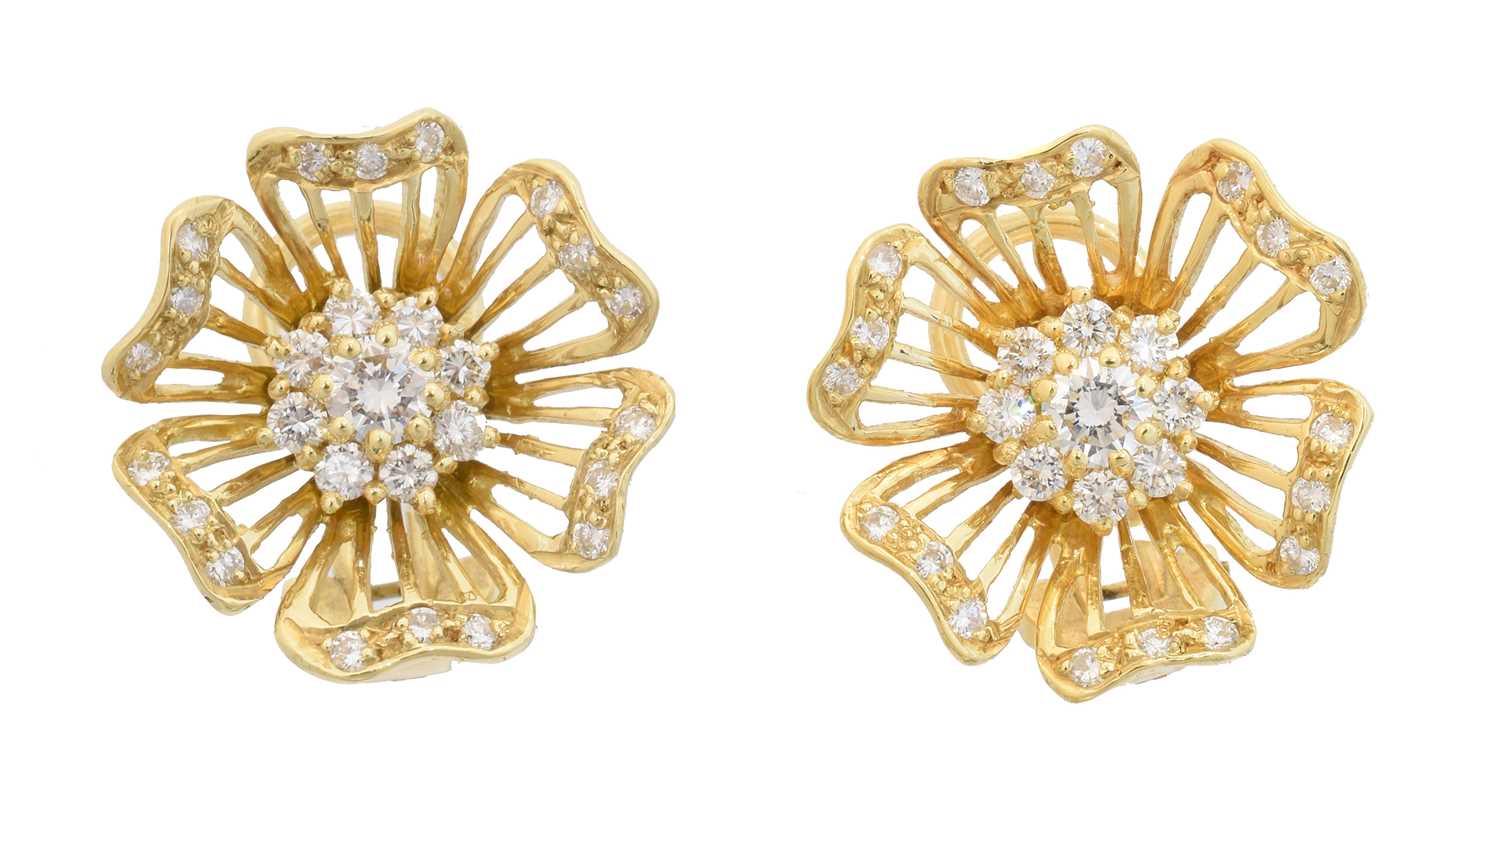 Lot 52 - A pair of 18ct gold diamond earrings by Cropp & Farr